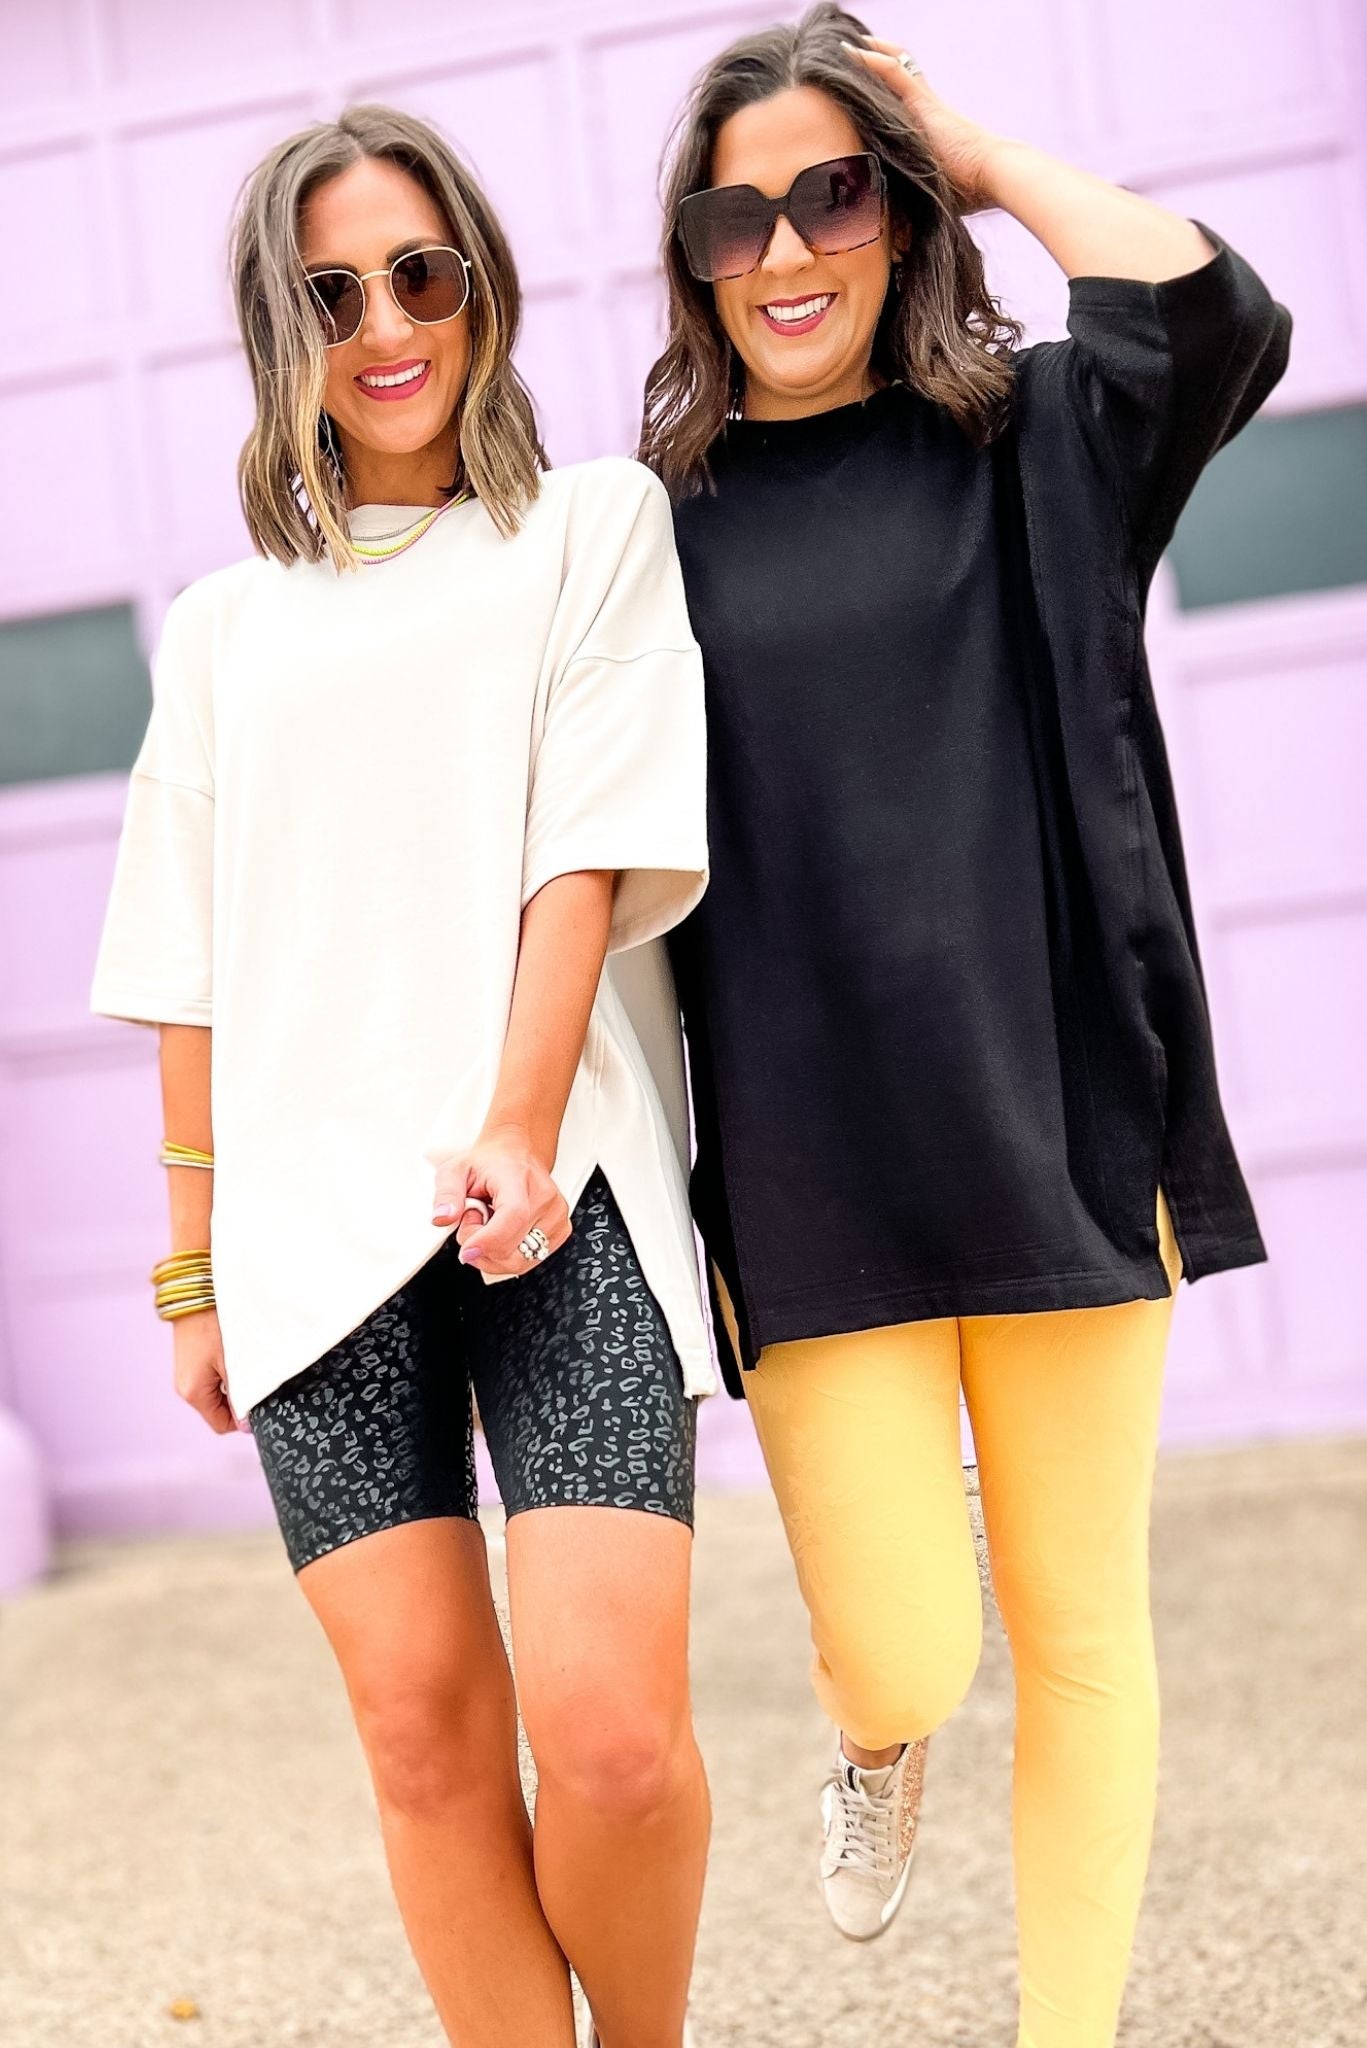 Black Short Sleeve Side Slit Pullover Top, pullover top, workout top, oversized, athleisure, black top, essential, shop style your senses by mallory fitzsimmons